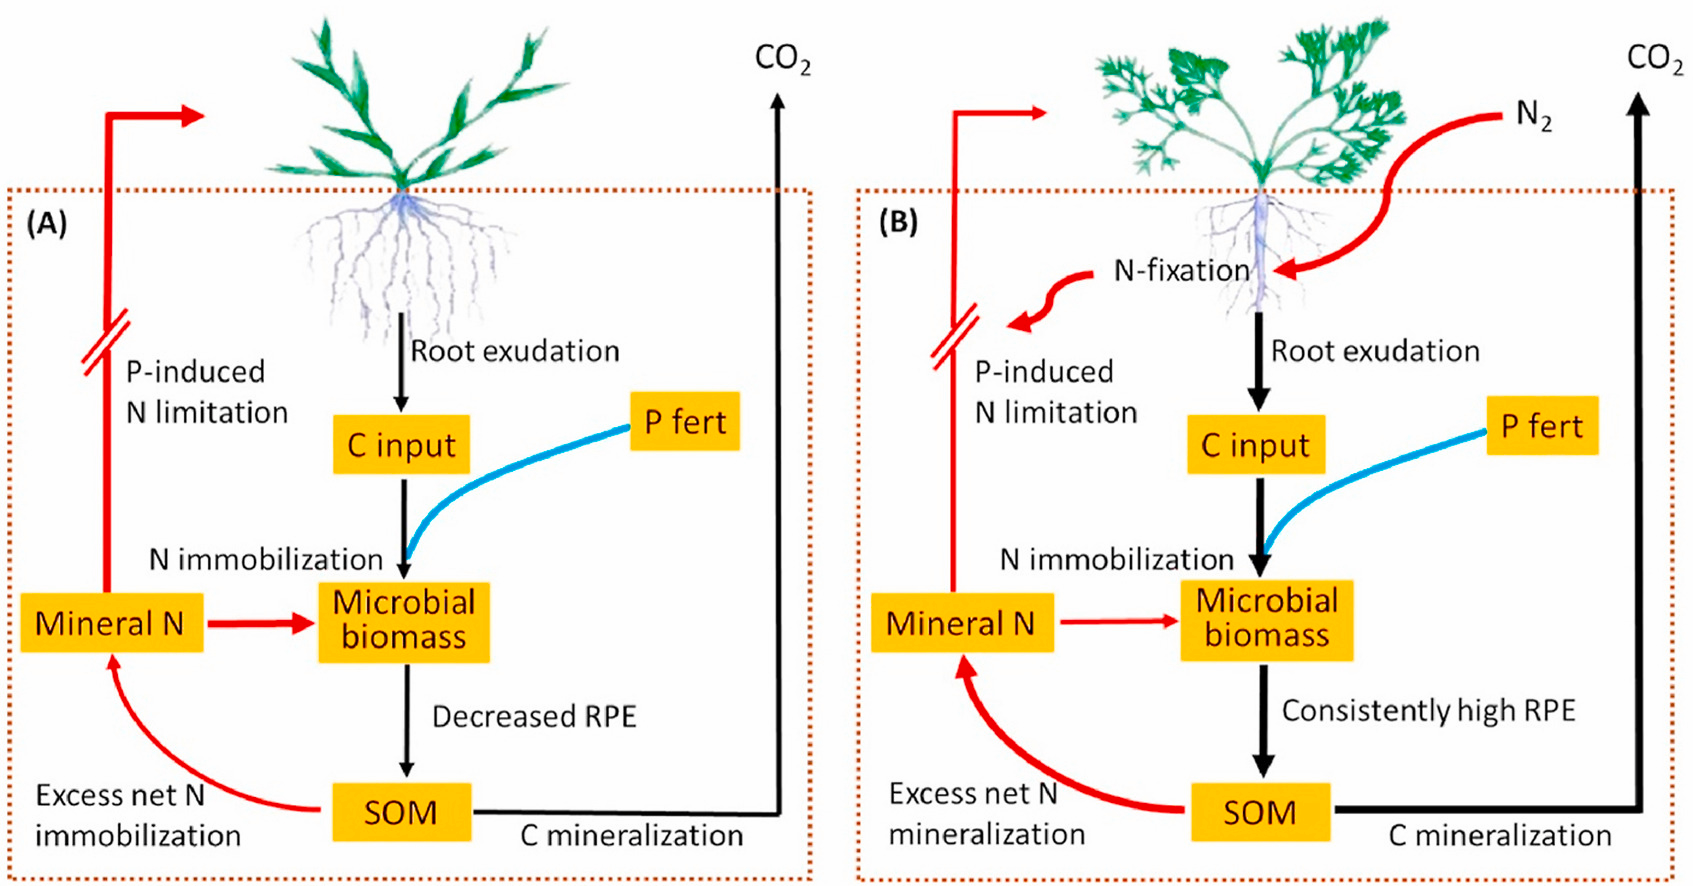 A new framework showing C-N-P interactions on the RPE